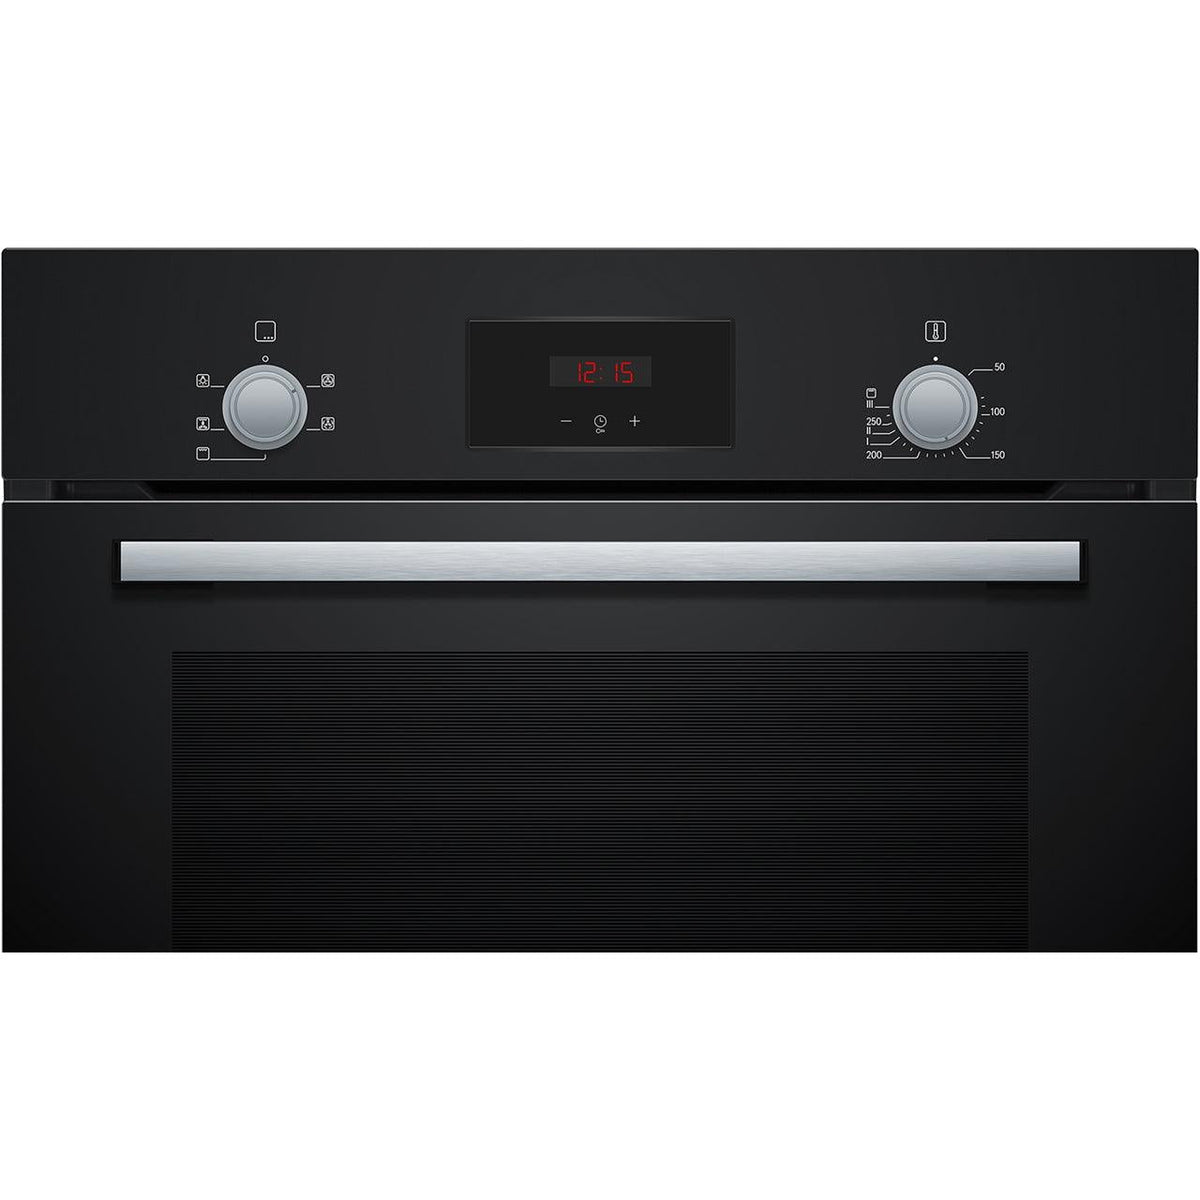 Bosch Built-In Electric Single Oven - Black | HHF113BA0B from DID Electrical - guaranteed Irish, guaranteed quality service. (6977416036540)